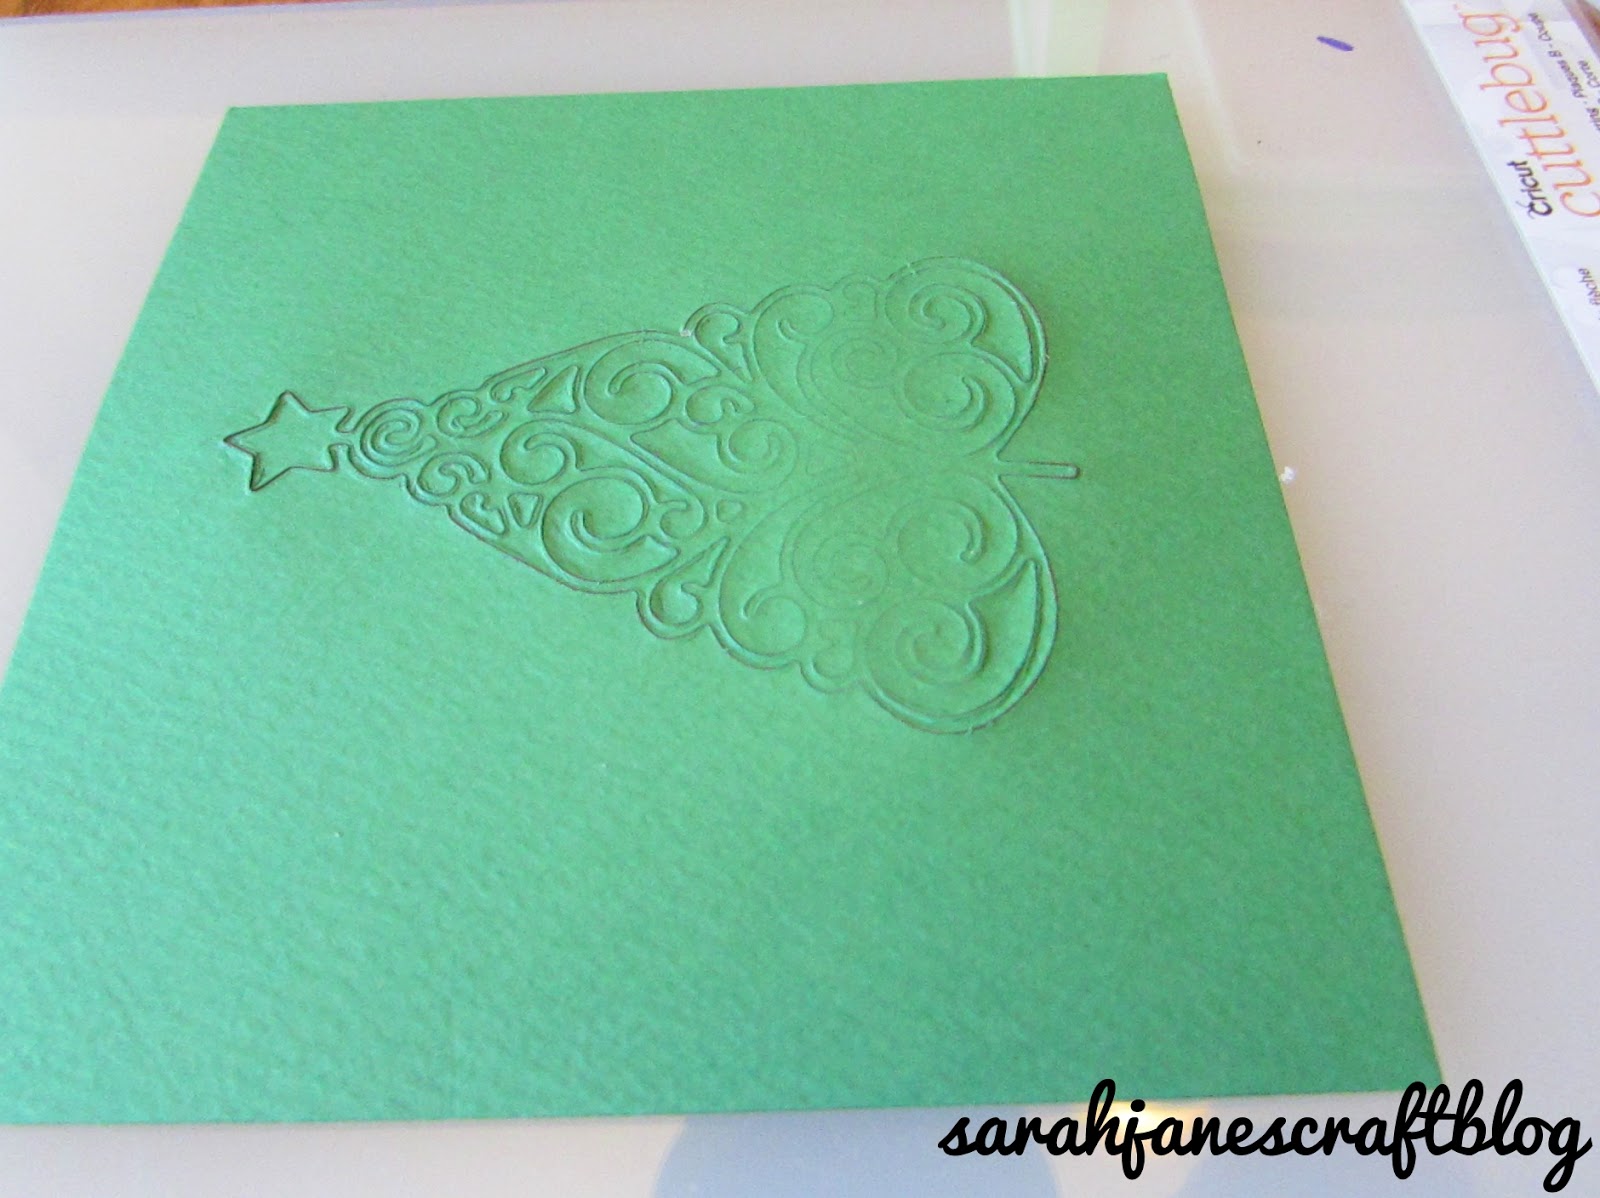 Stampin Up Tree Lot Dies & A Die Cutting Hack For Saving Time!